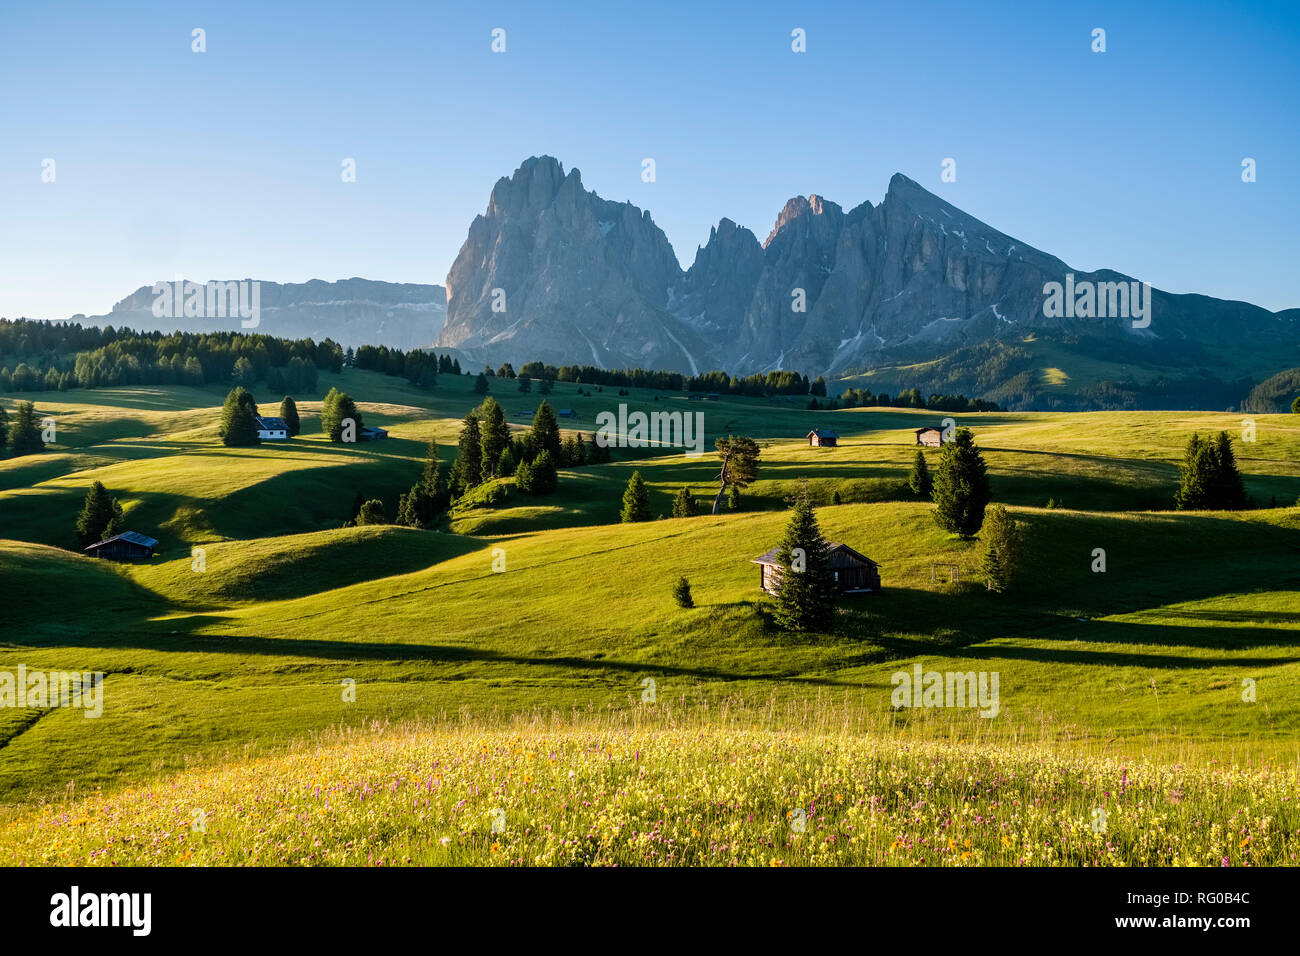 Hilly agricultural countryside with green pastures and trees at Seiser Alm, Alpe di Siusi, the mountain Plattkofel, Sasso Piatto, in the distance, at  Stock Photo